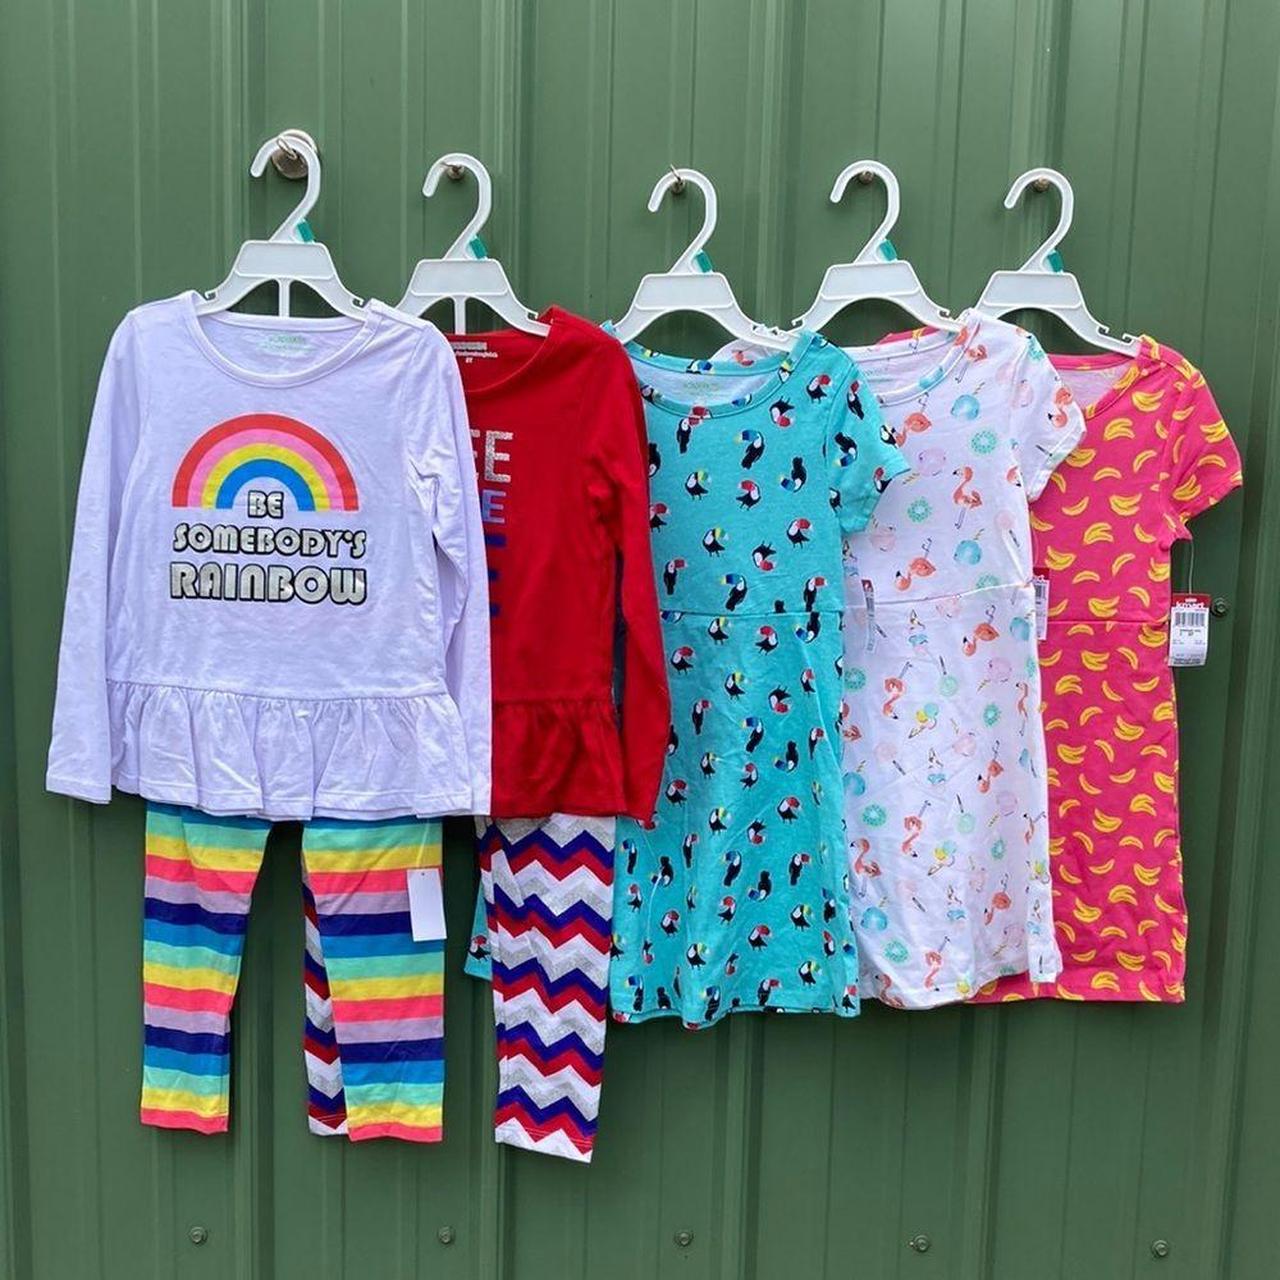 3 pairs of pants, skort, shirts and jacket for Girls (Set of 8) - clothing  & accessories - by owner - apparel sale -...